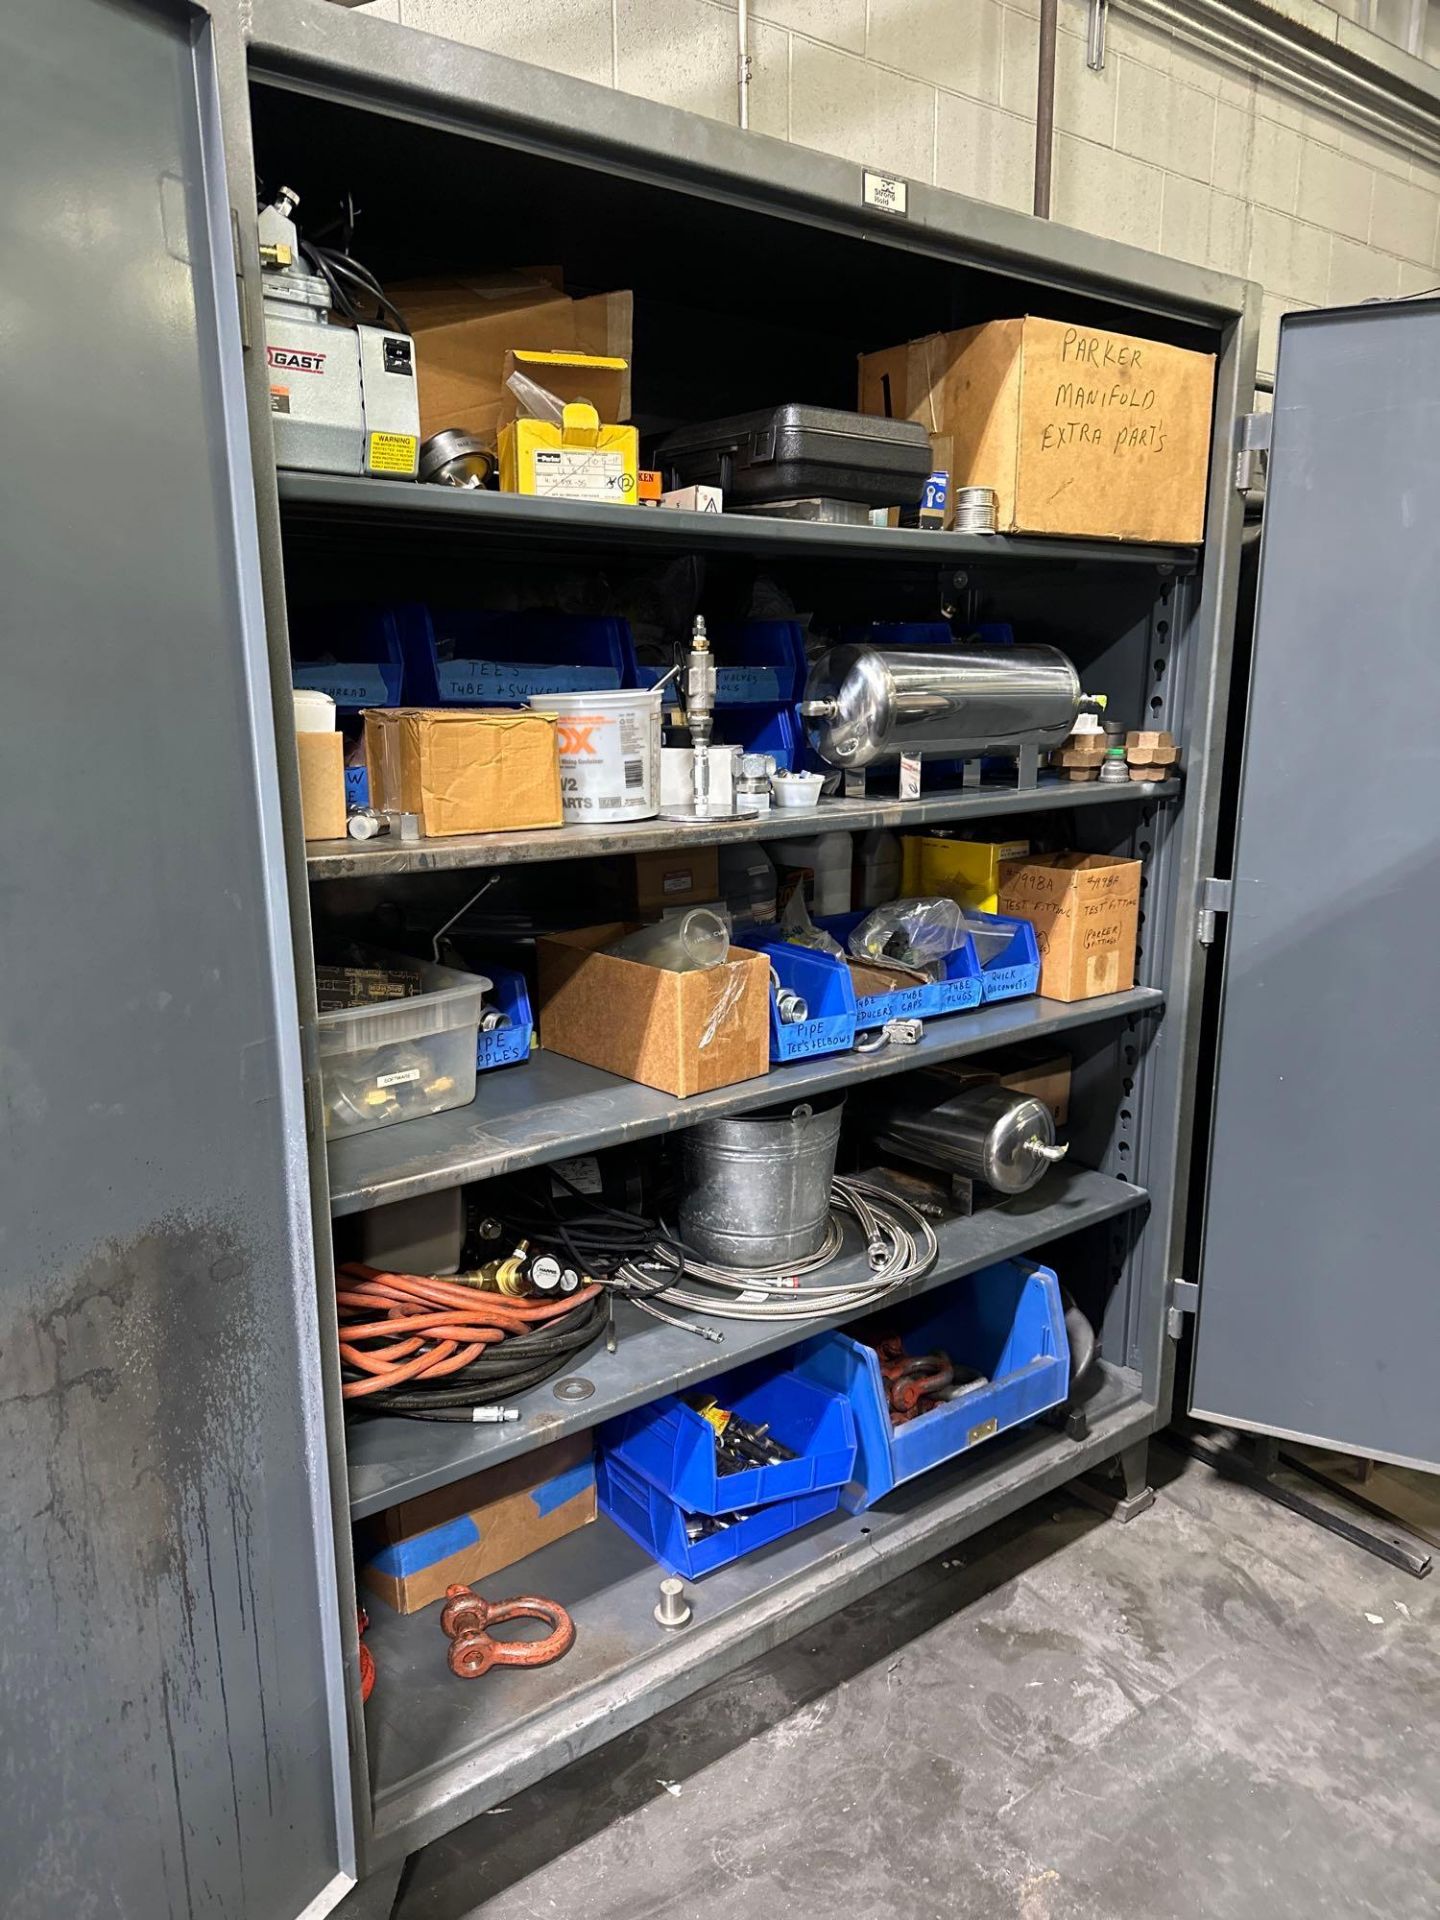 2 Door Steel Cabinet w/ Pipe Elbows, Reducers, Plugs, Quick Disconnects, Straight Threads, Shut Off - Image 3 of 17